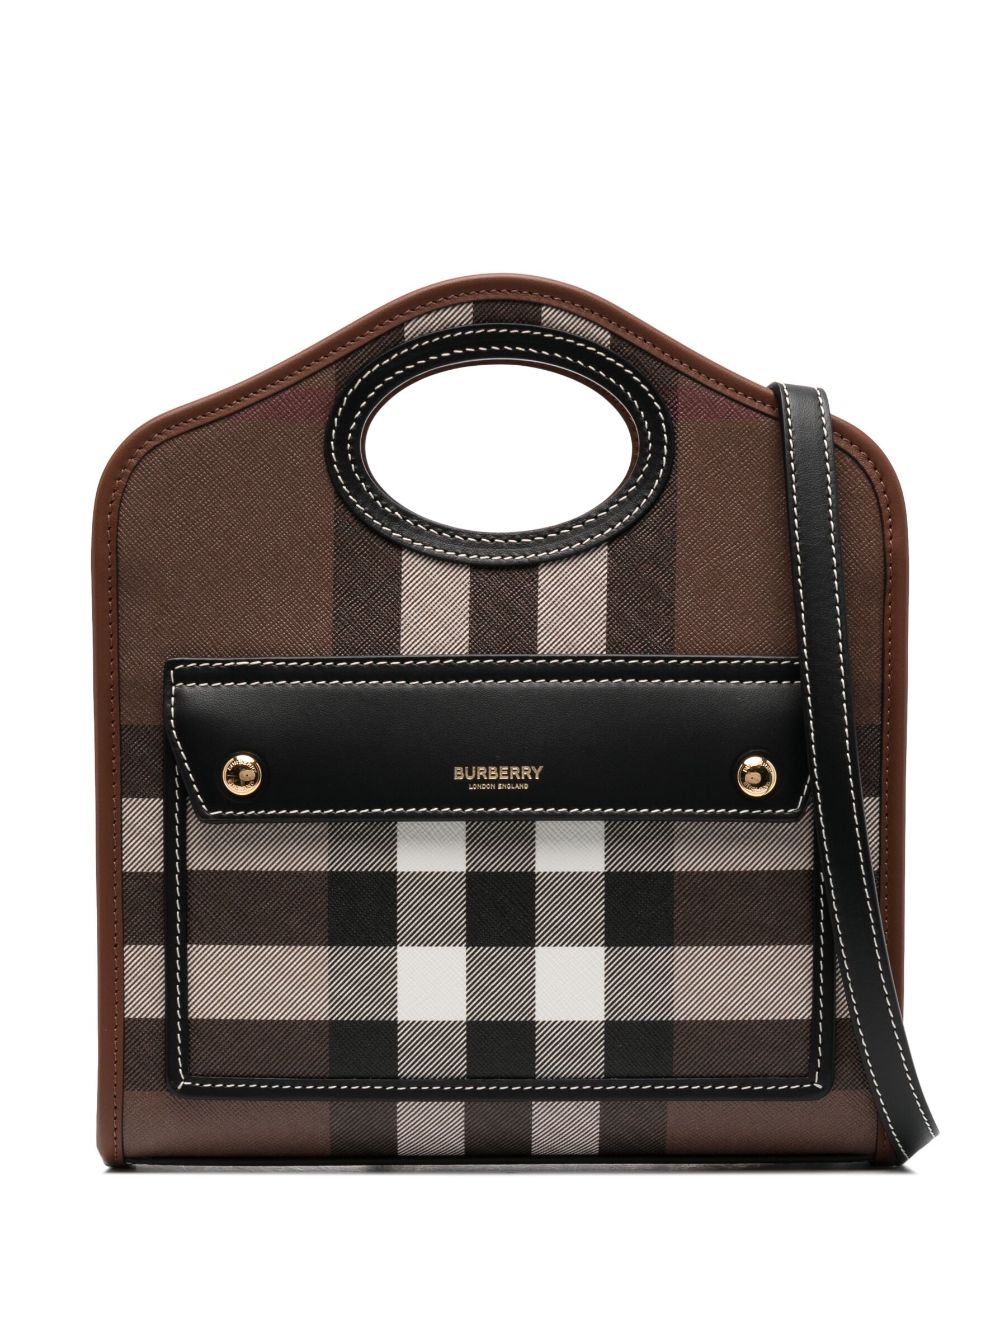 BURBERRY Mini Pocket Tote Handbag with House Check and Leather Accents, Detachable Strap - Brown